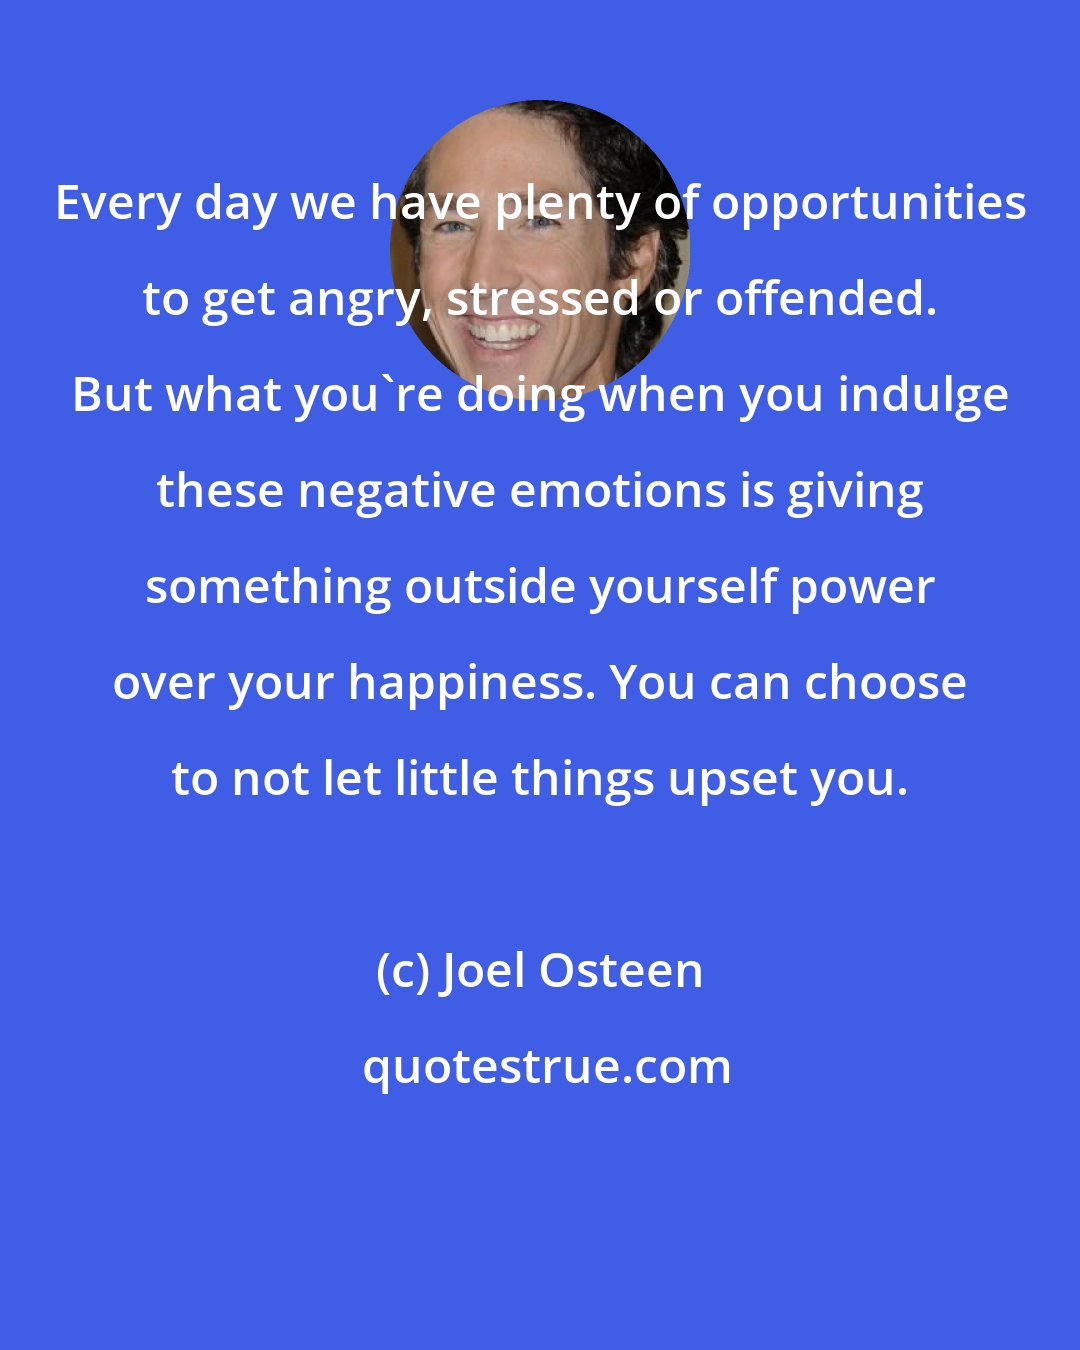 Joel Osteen: Every day we have plenty of opportunities to get angry, stressed or offended. But what you're doing when you indulge these negative emotions is giving something outside yourself power over your happiness. You can choose to not let little things upset you.